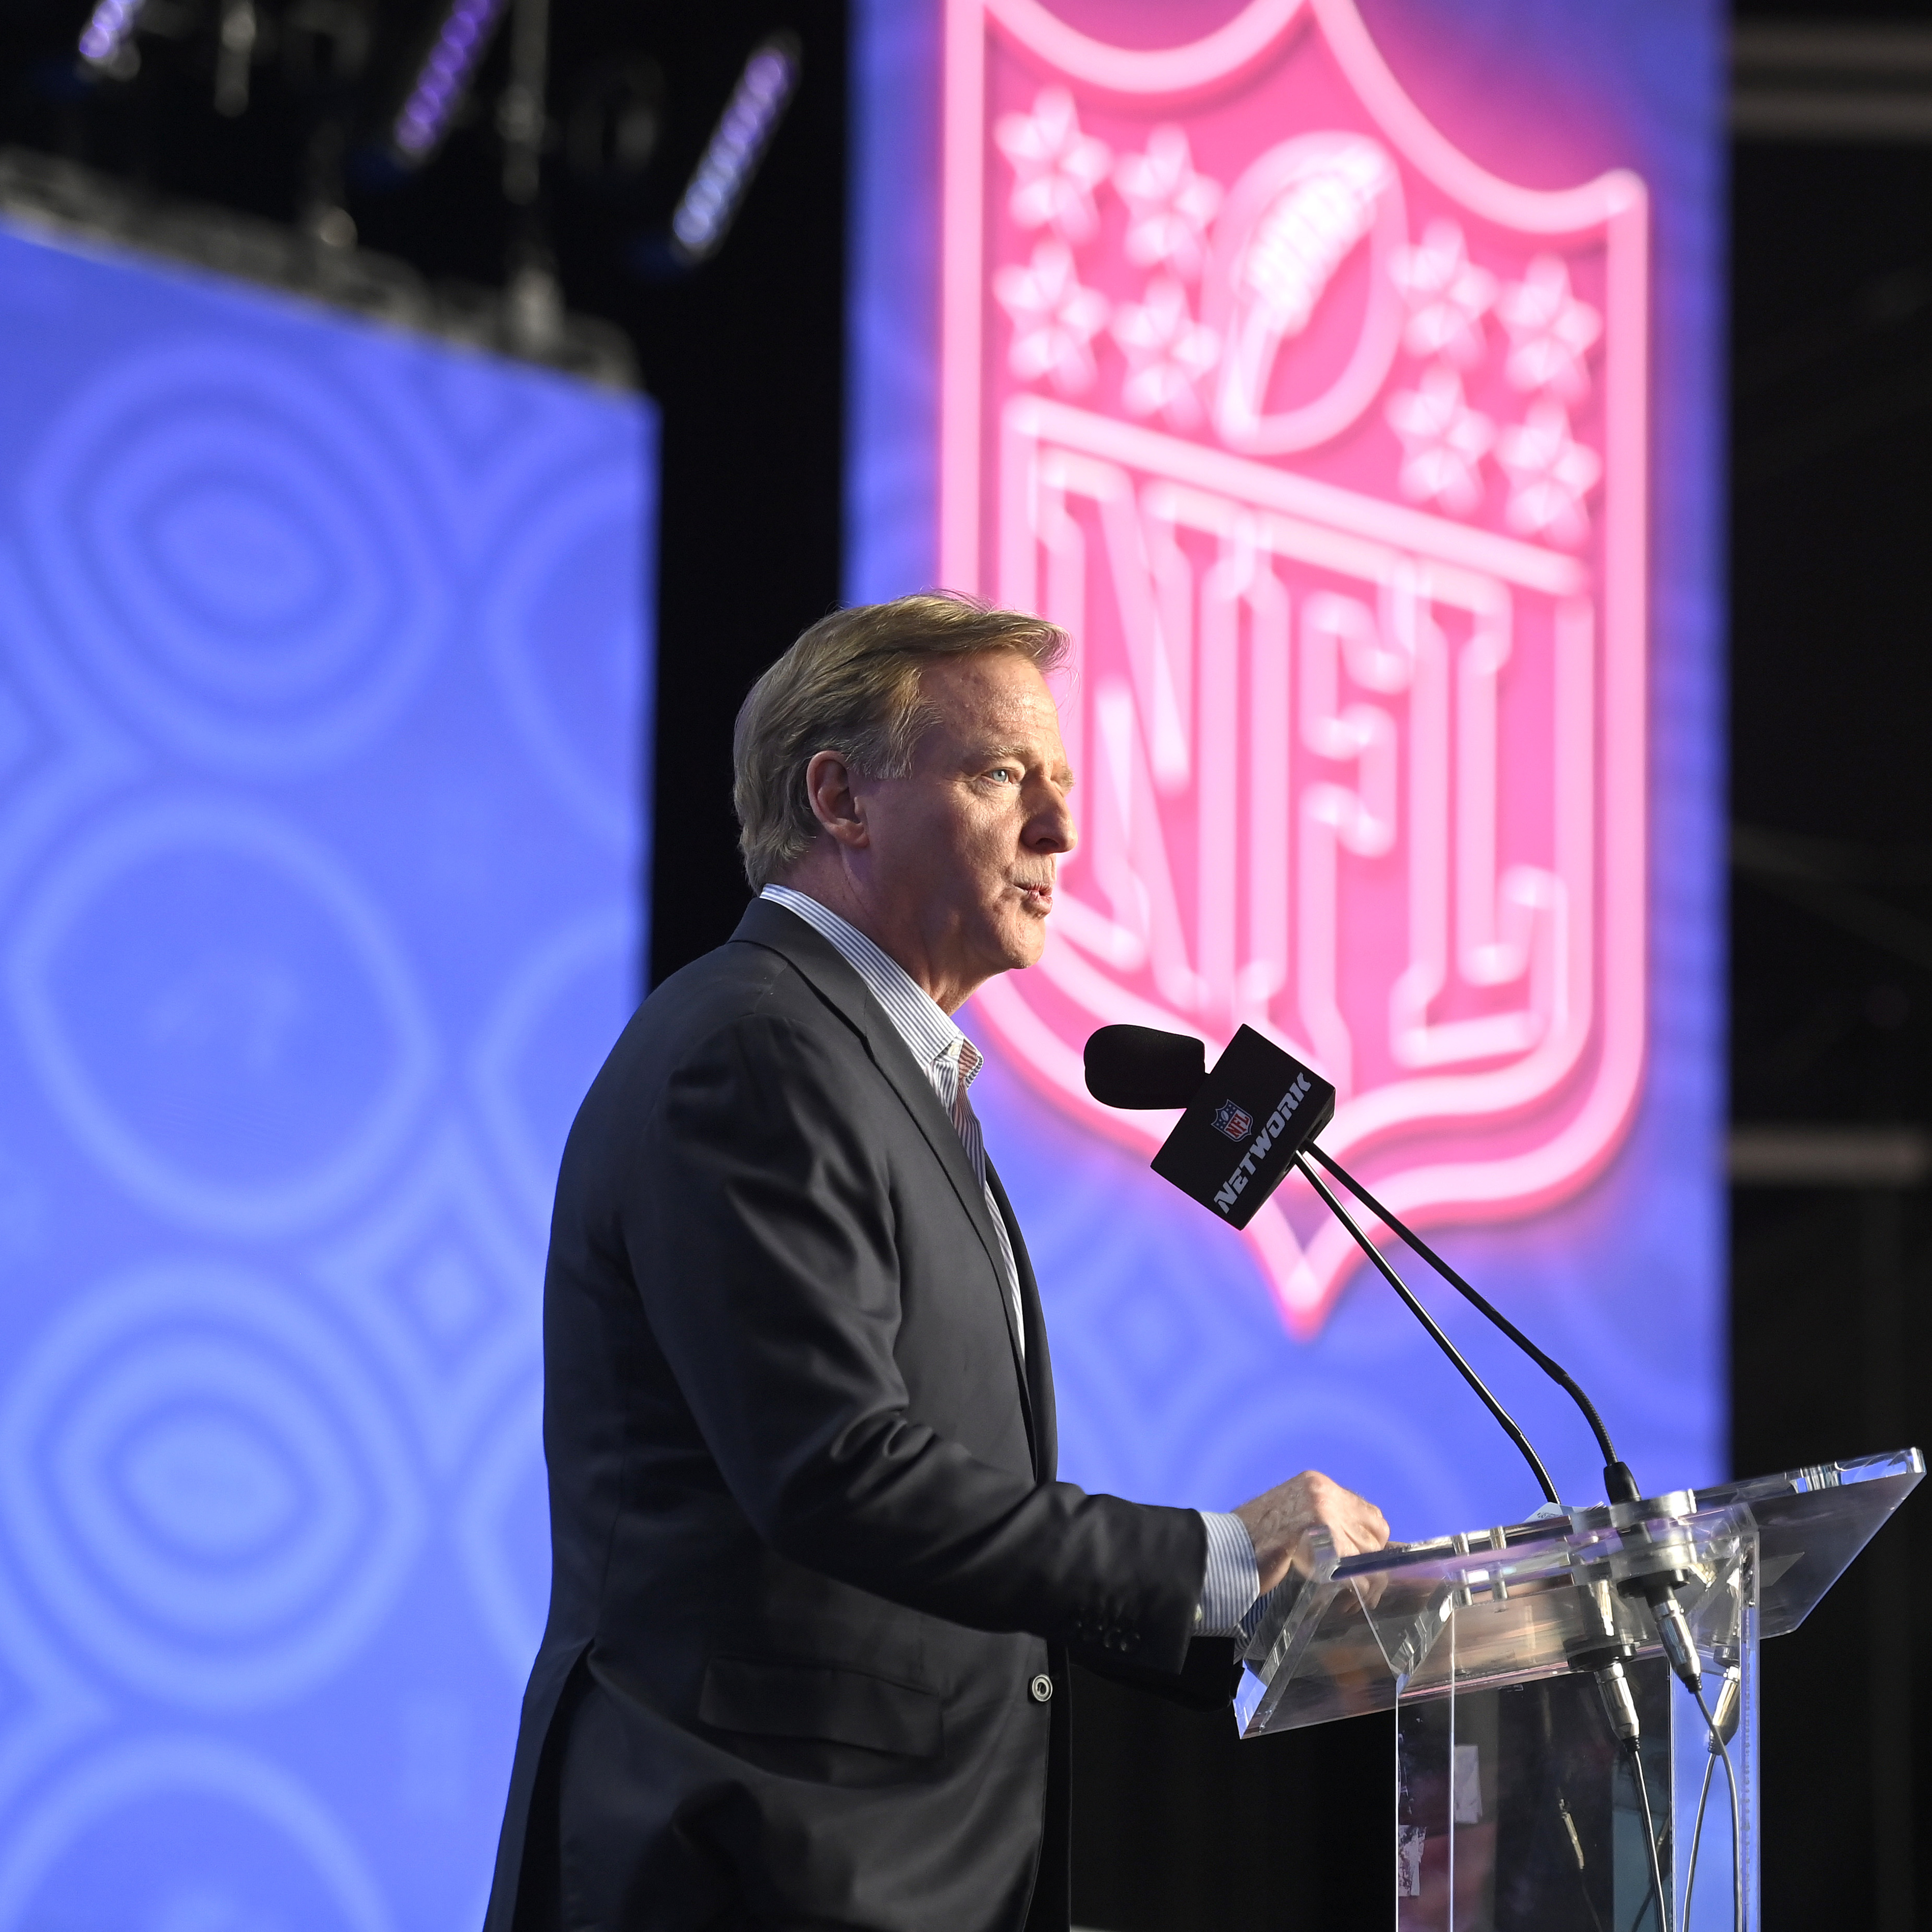 Roger Goodell on Possible Pro Bowl Changes: ‘The Game Itself Doesn’t Work’